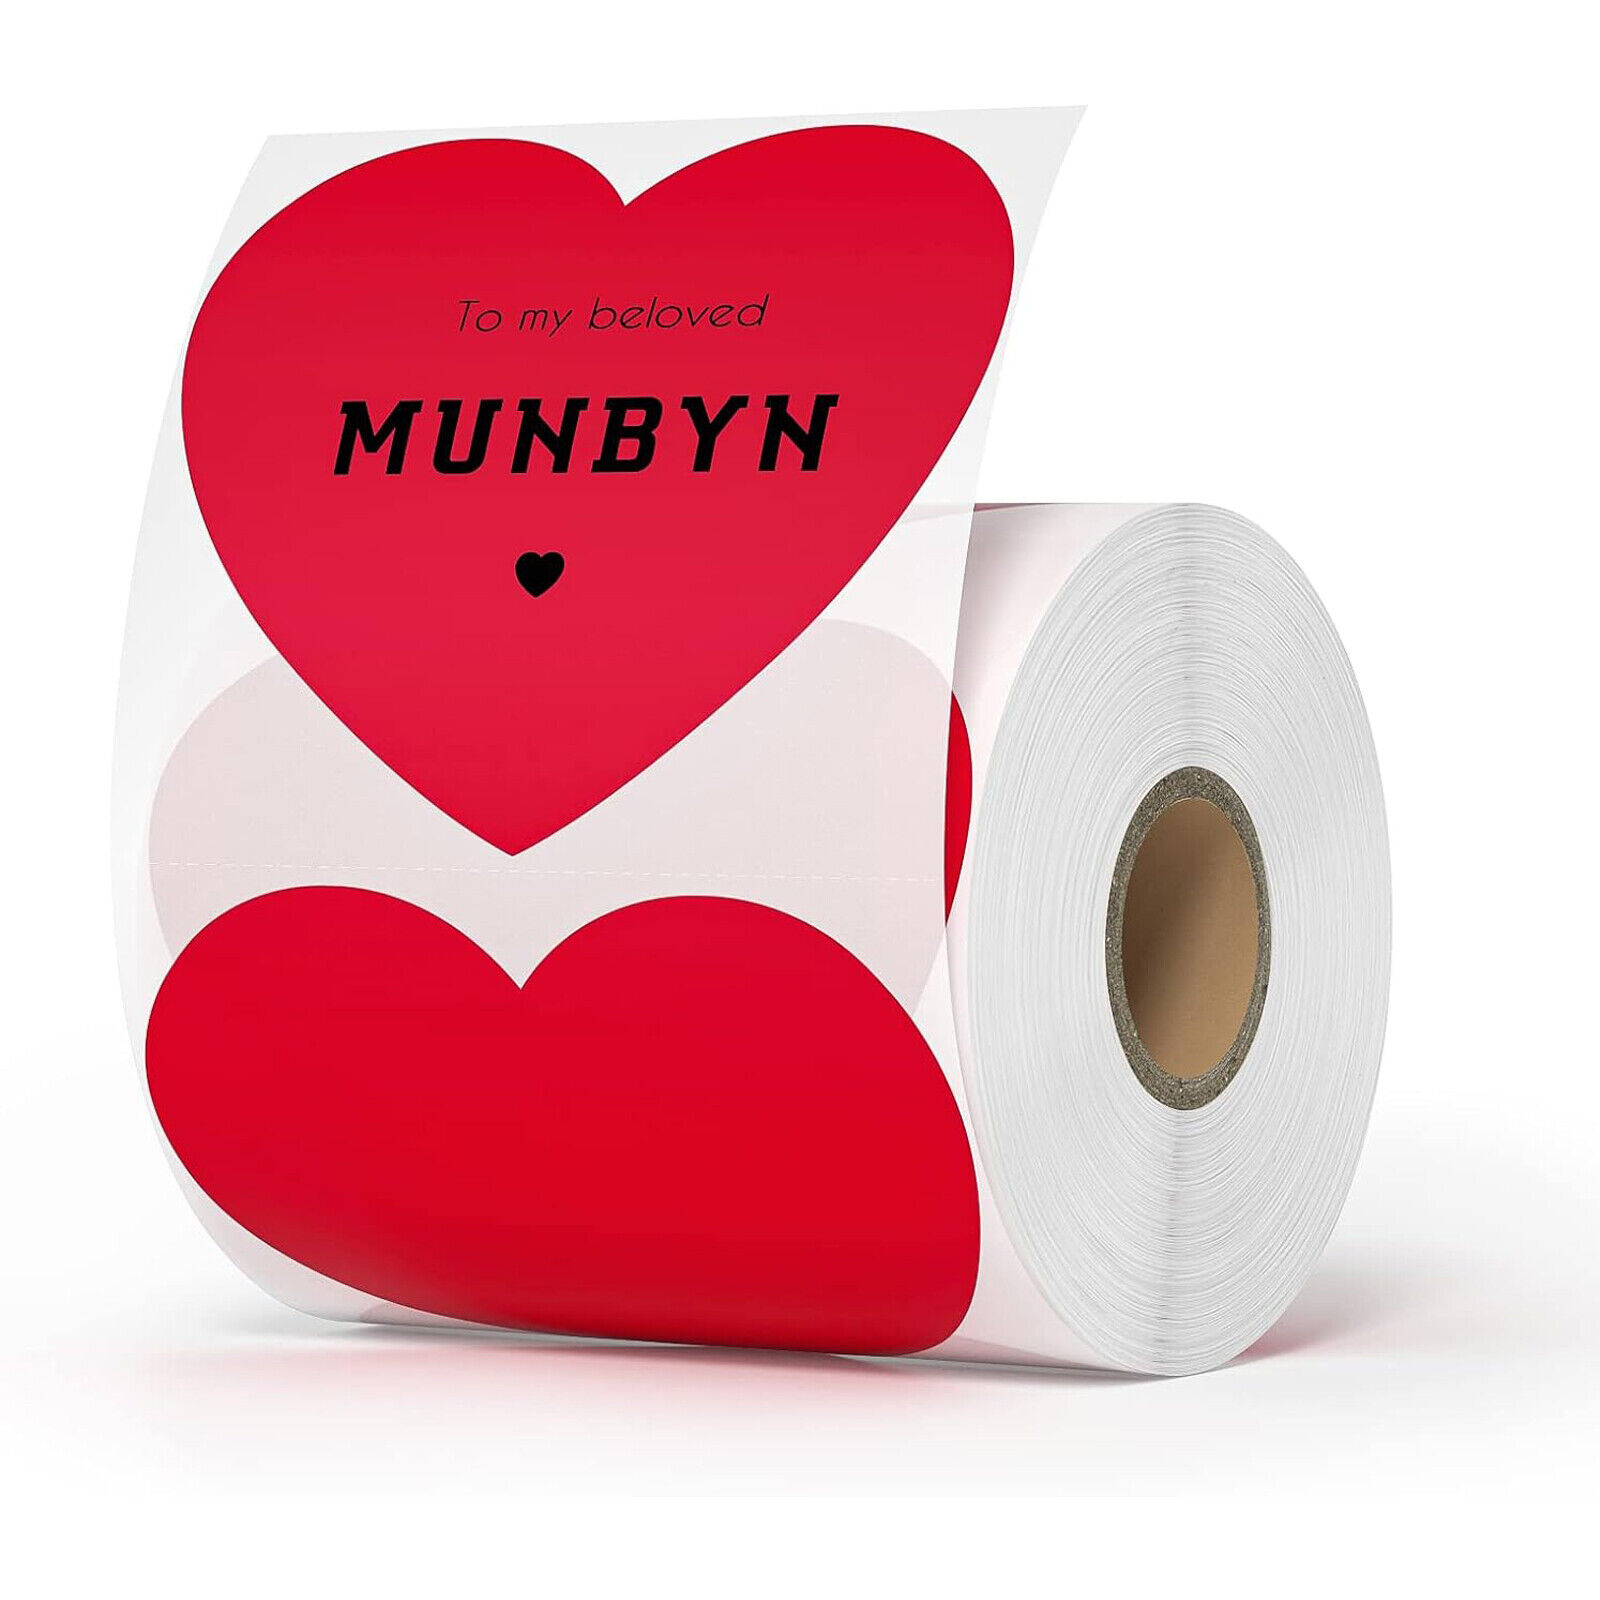 MUNBYN Heart-Shaped Thermal Sticker Adhesive Red Love Valentine's Day 400 Labels